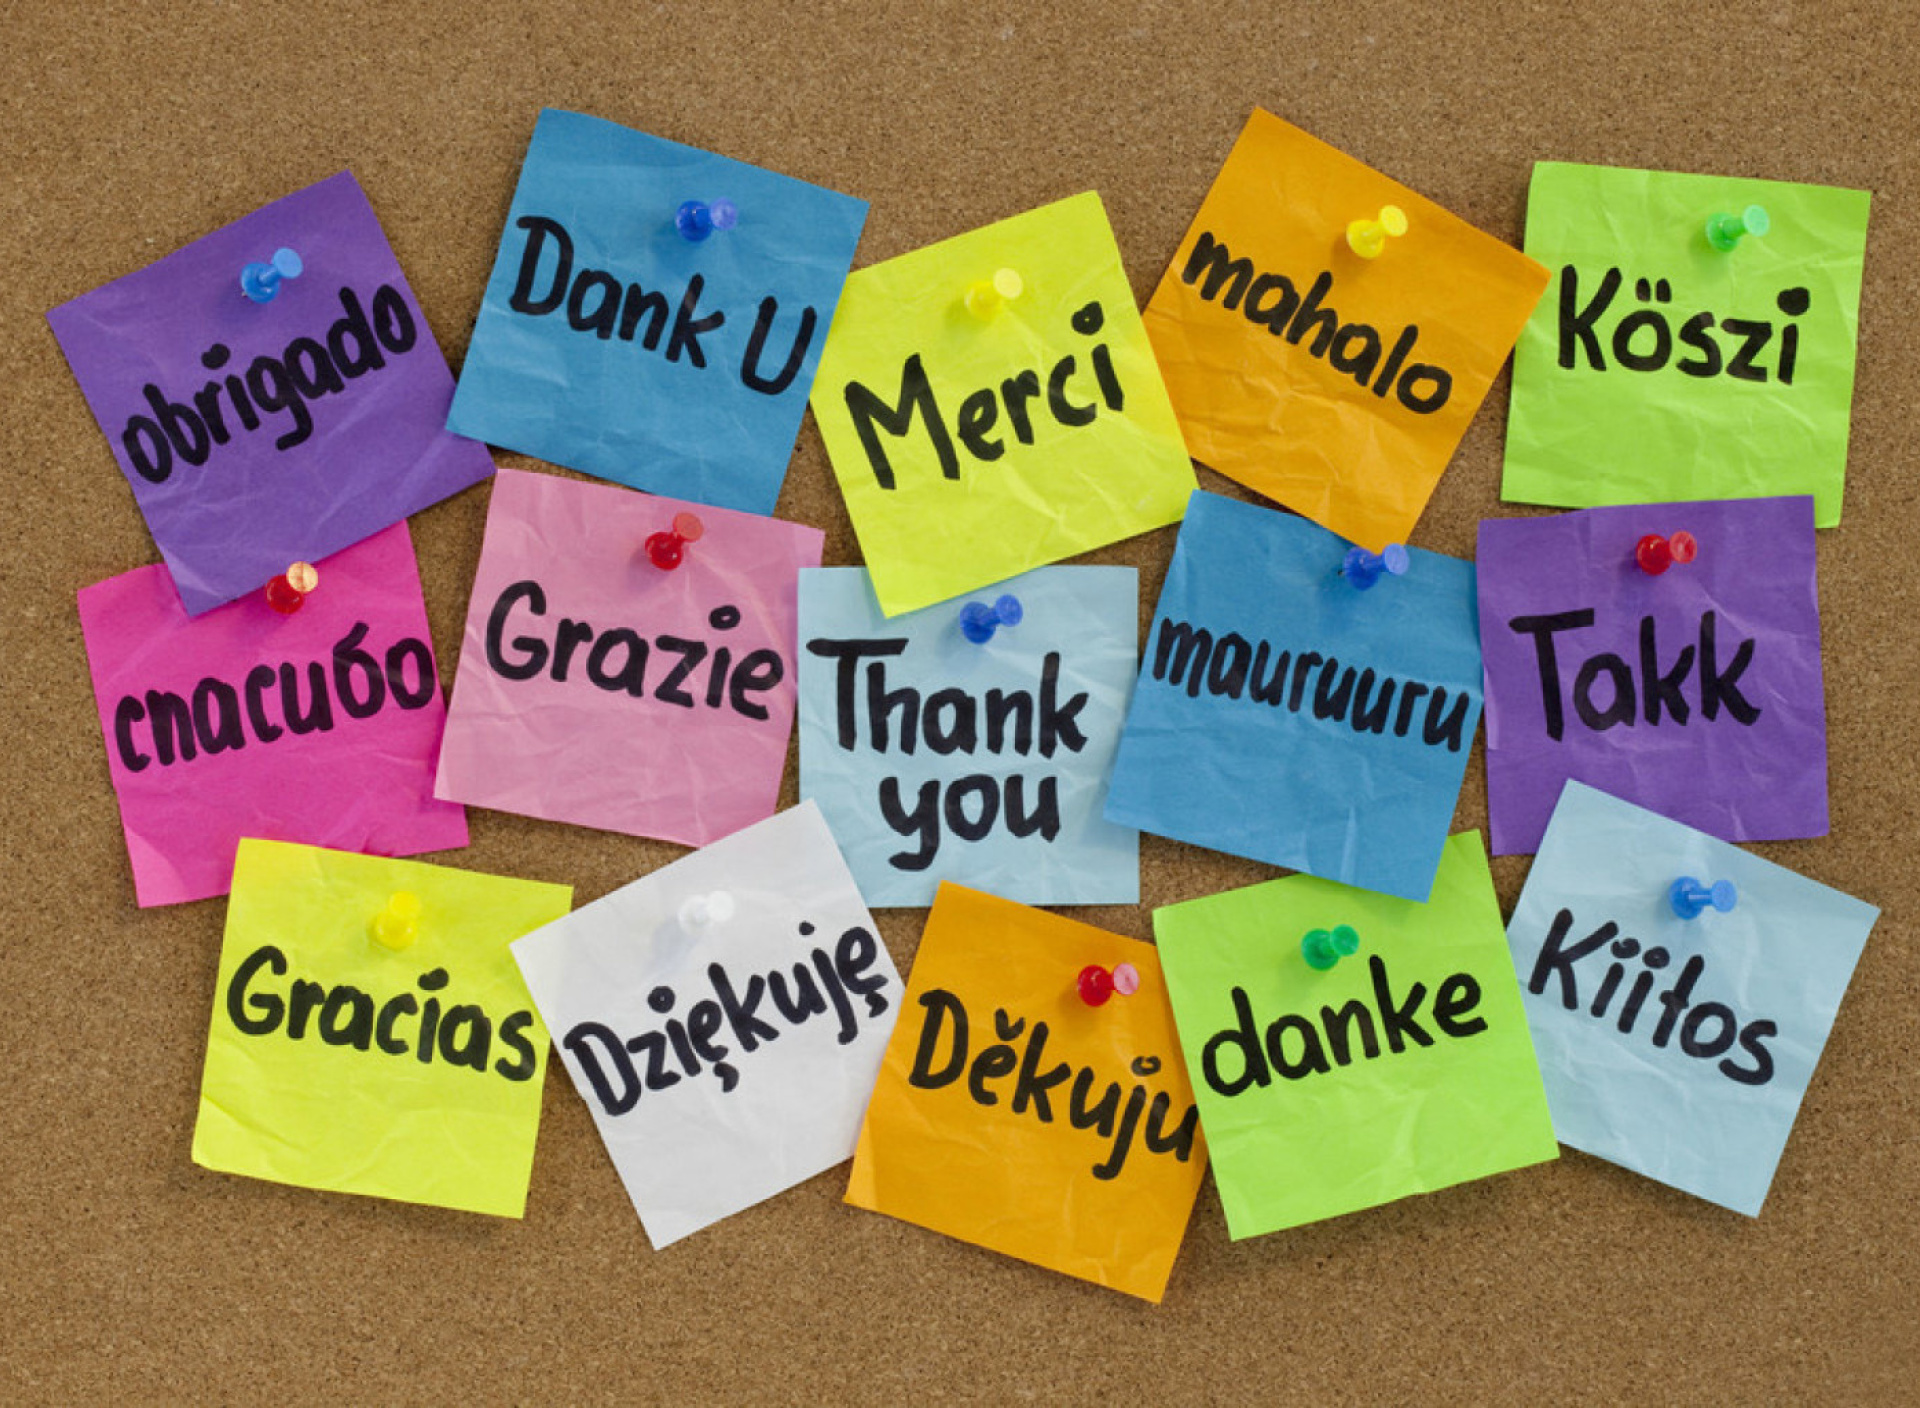 How To Say Thank You in Different Languages screenshot #1 1920x1408